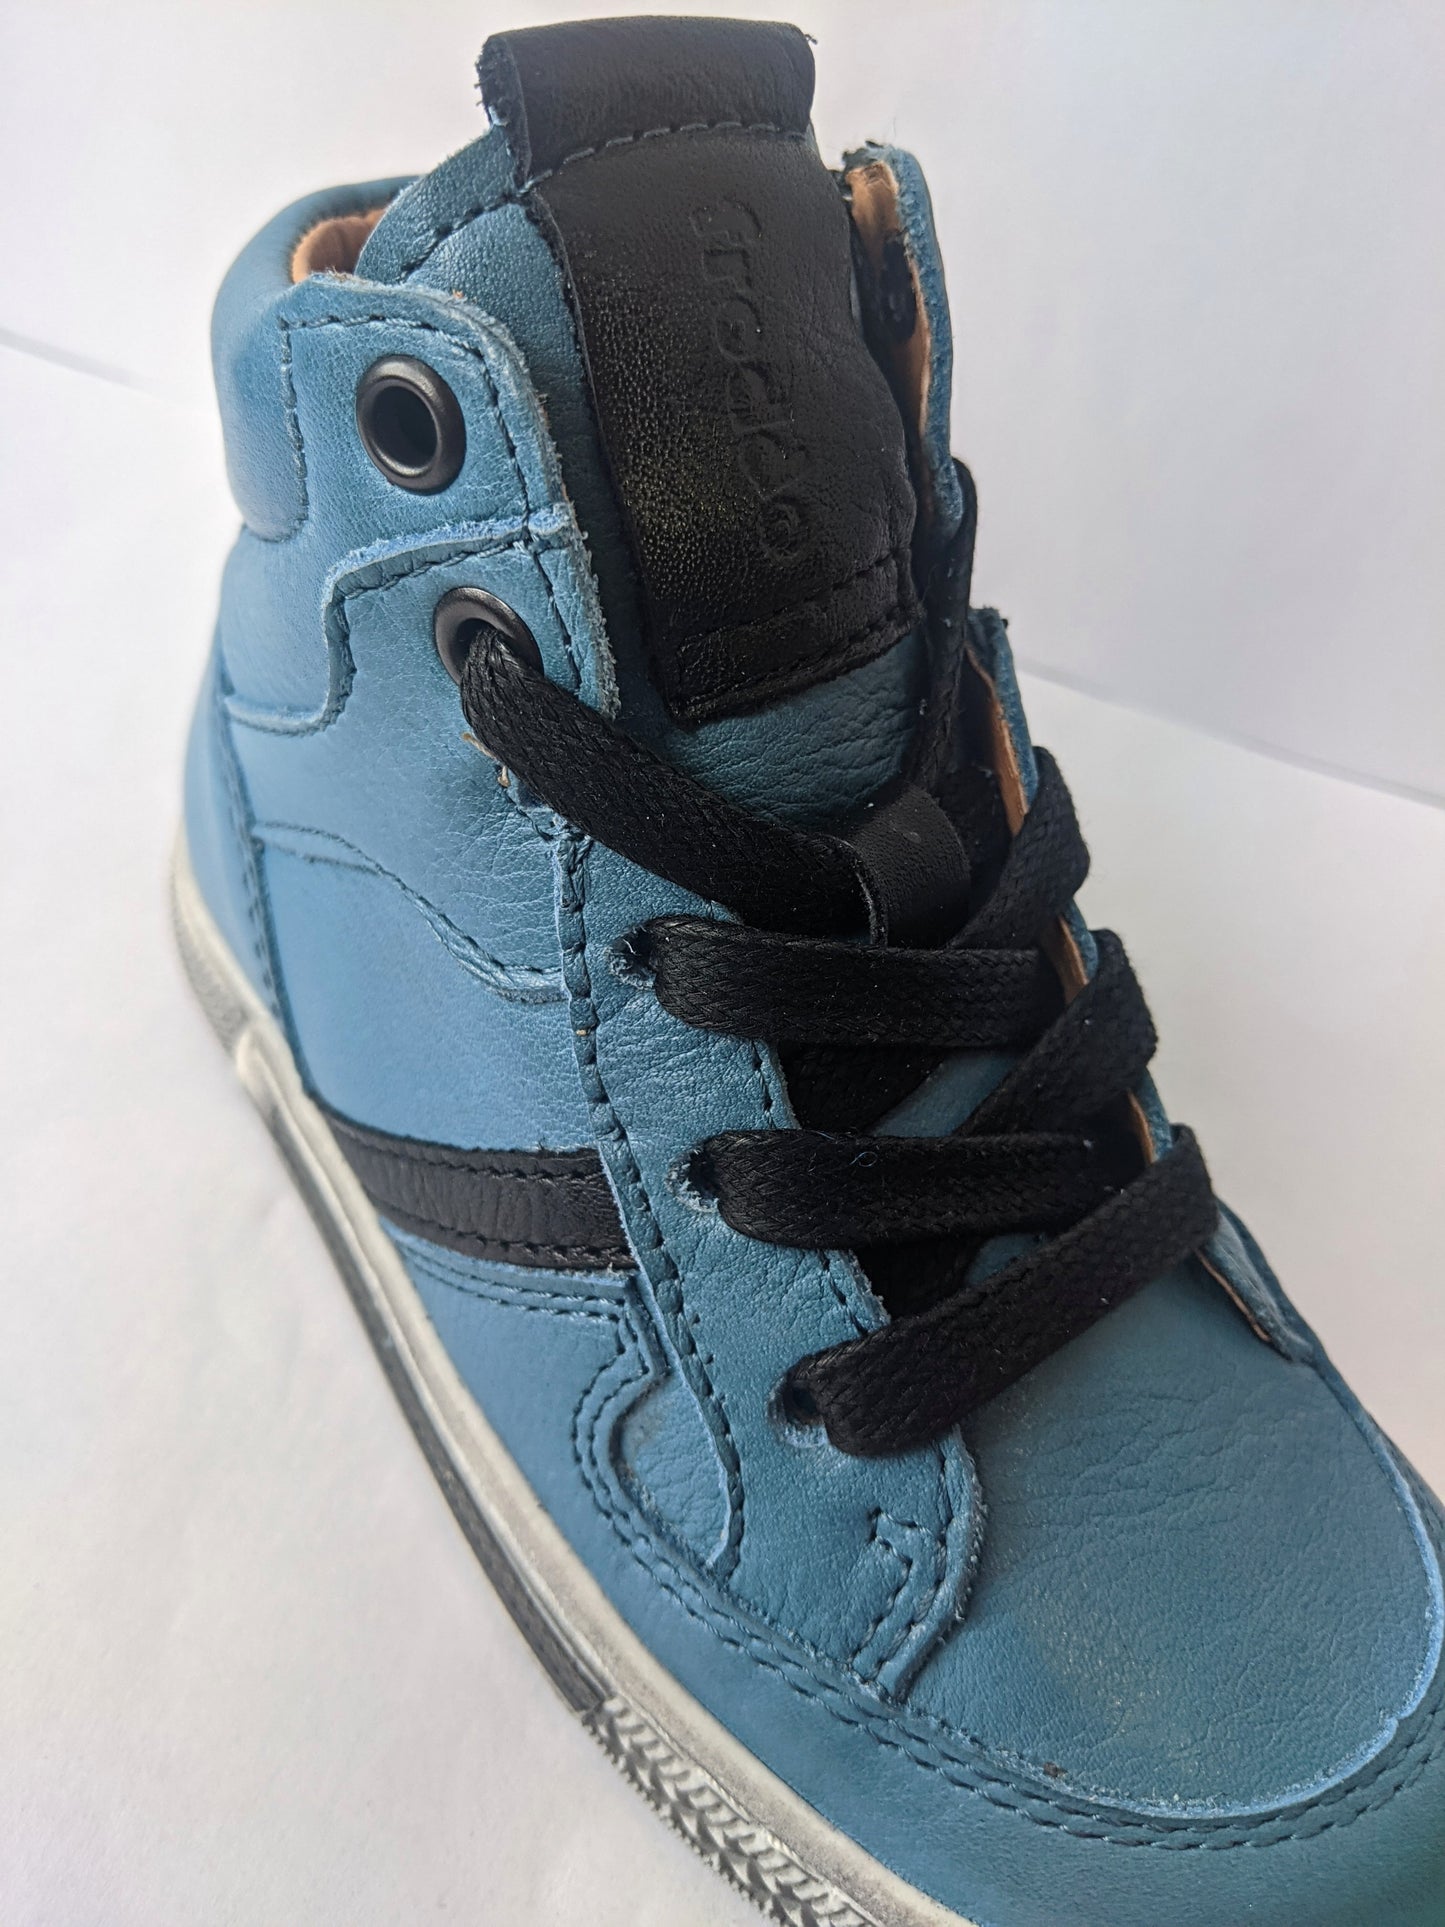 A boys casual hi top boot by Froddo,style G3110128-1, in Teal leather with lace and zip fastening. Angled view.